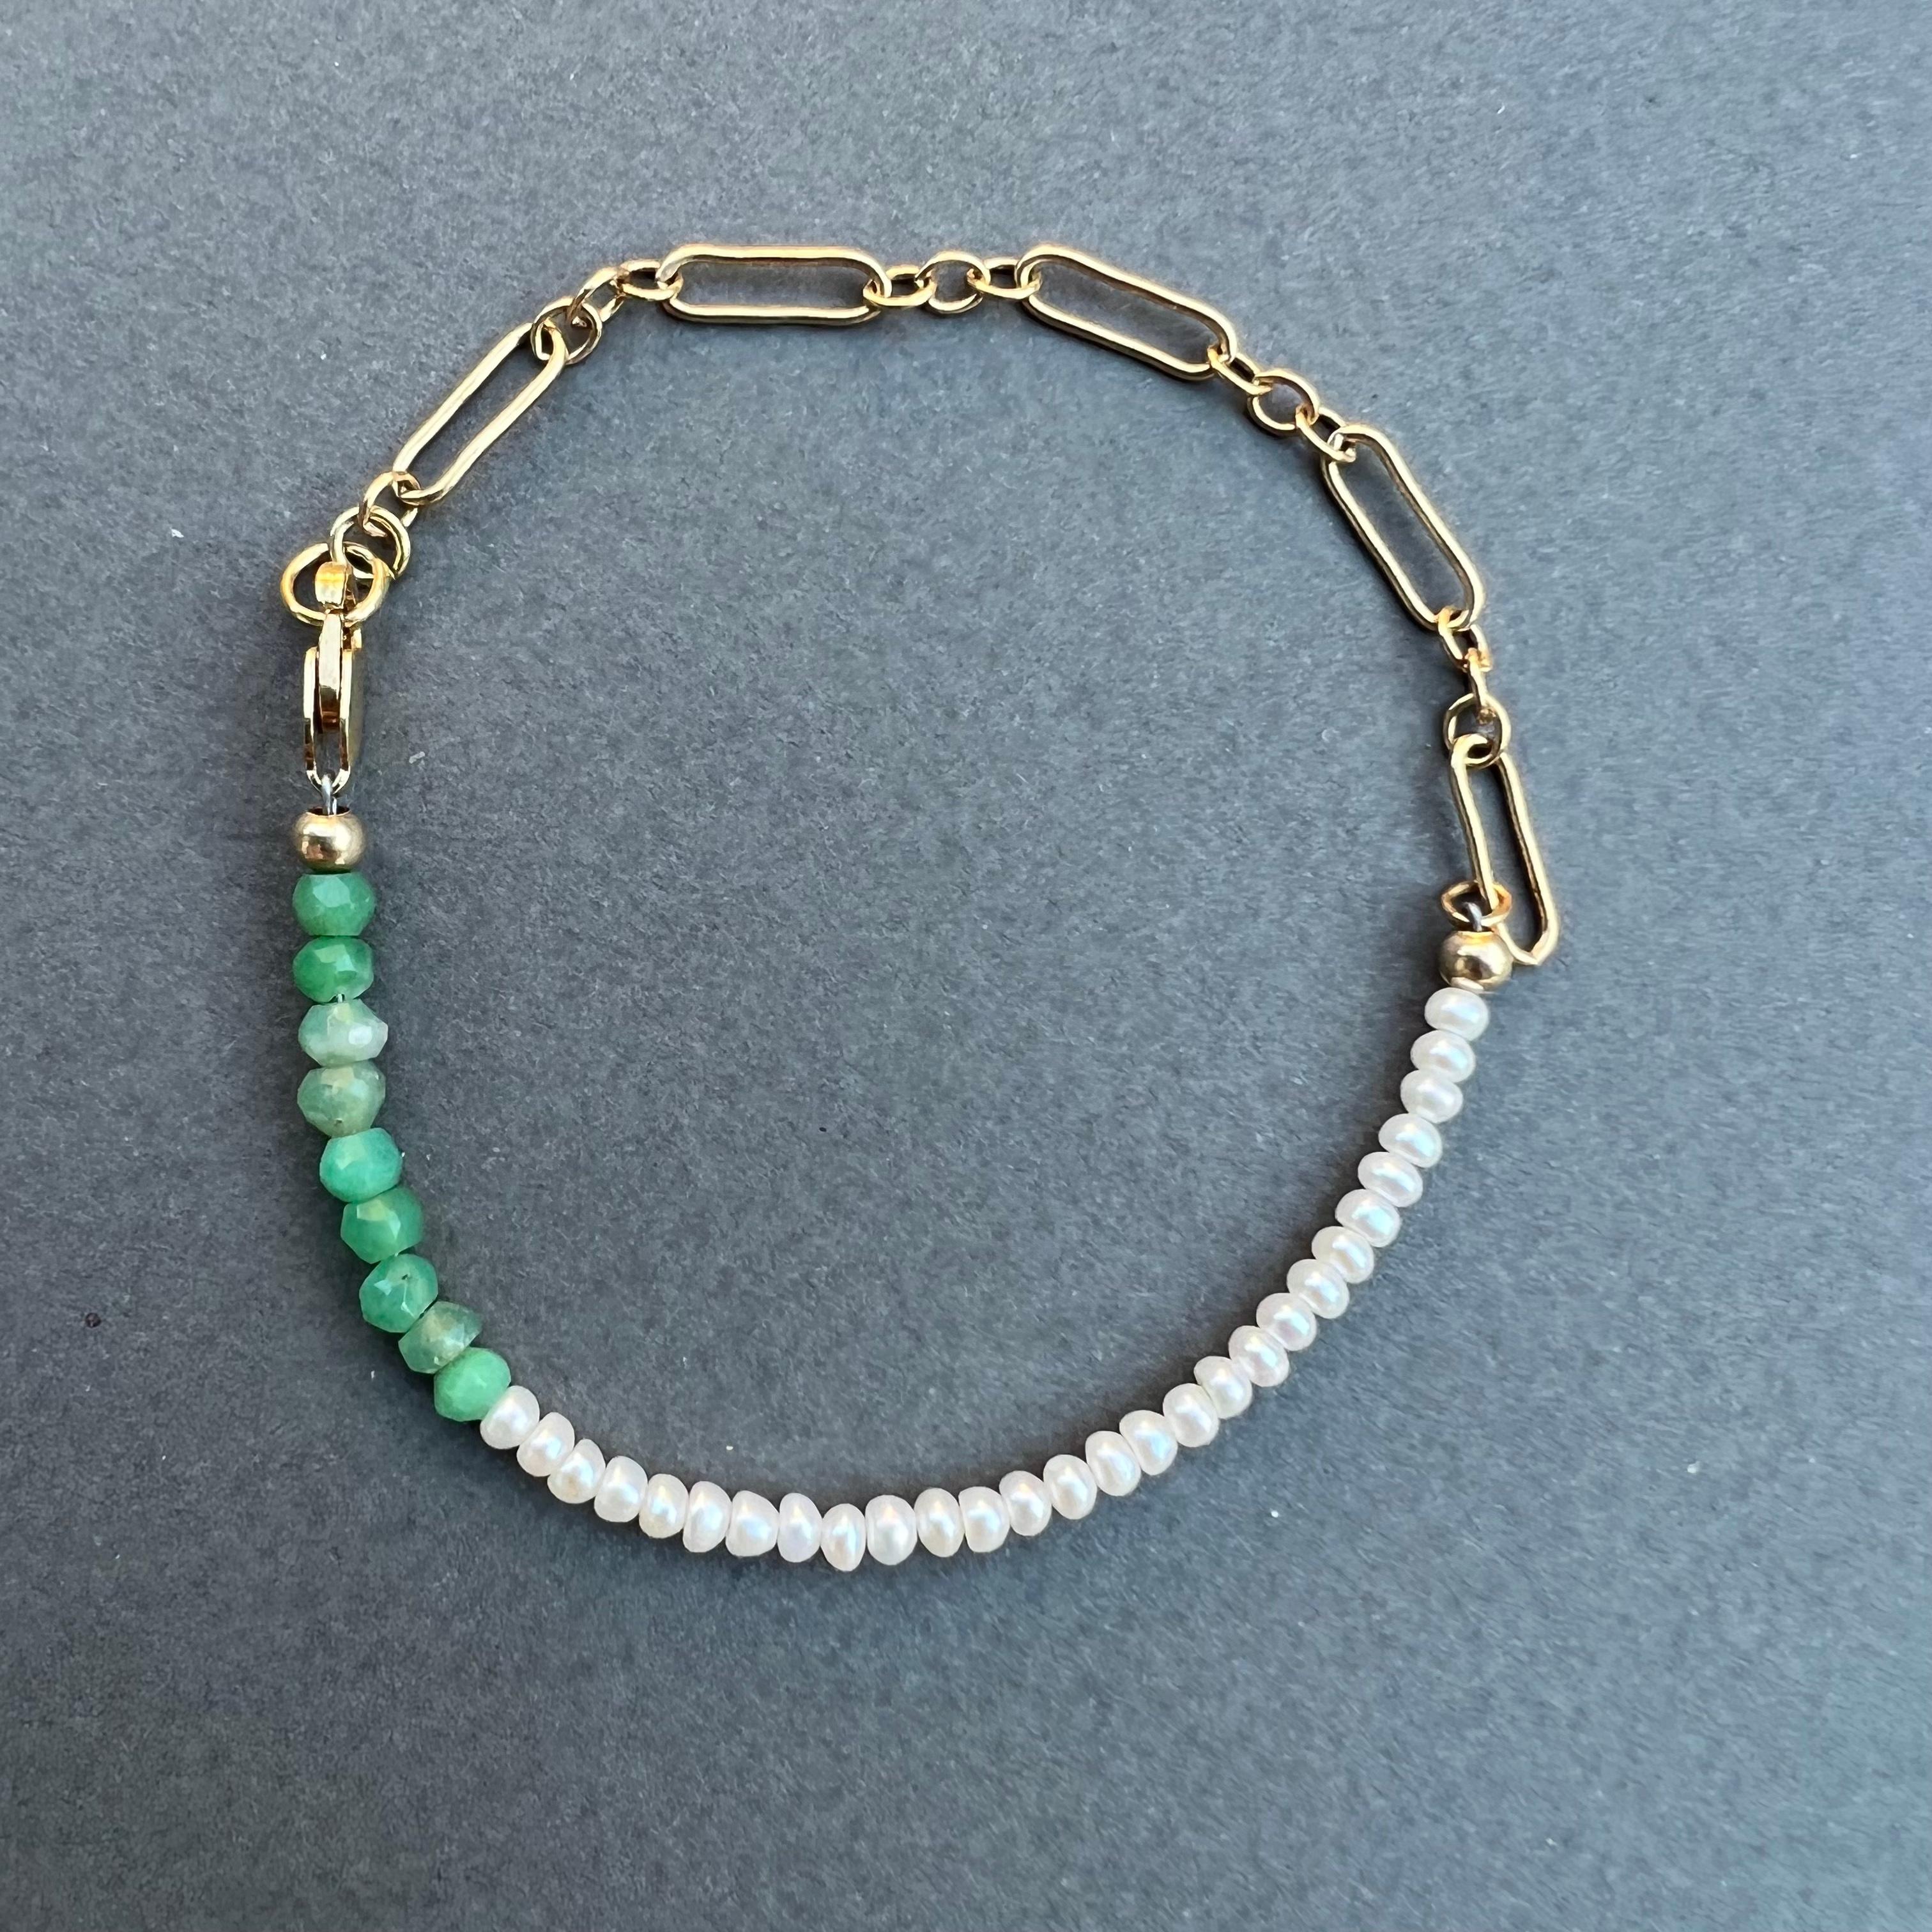 Round Cut White Pearl Chrysoprase Bead Bracelet Gold Filled Chain J Dauphin For Sale